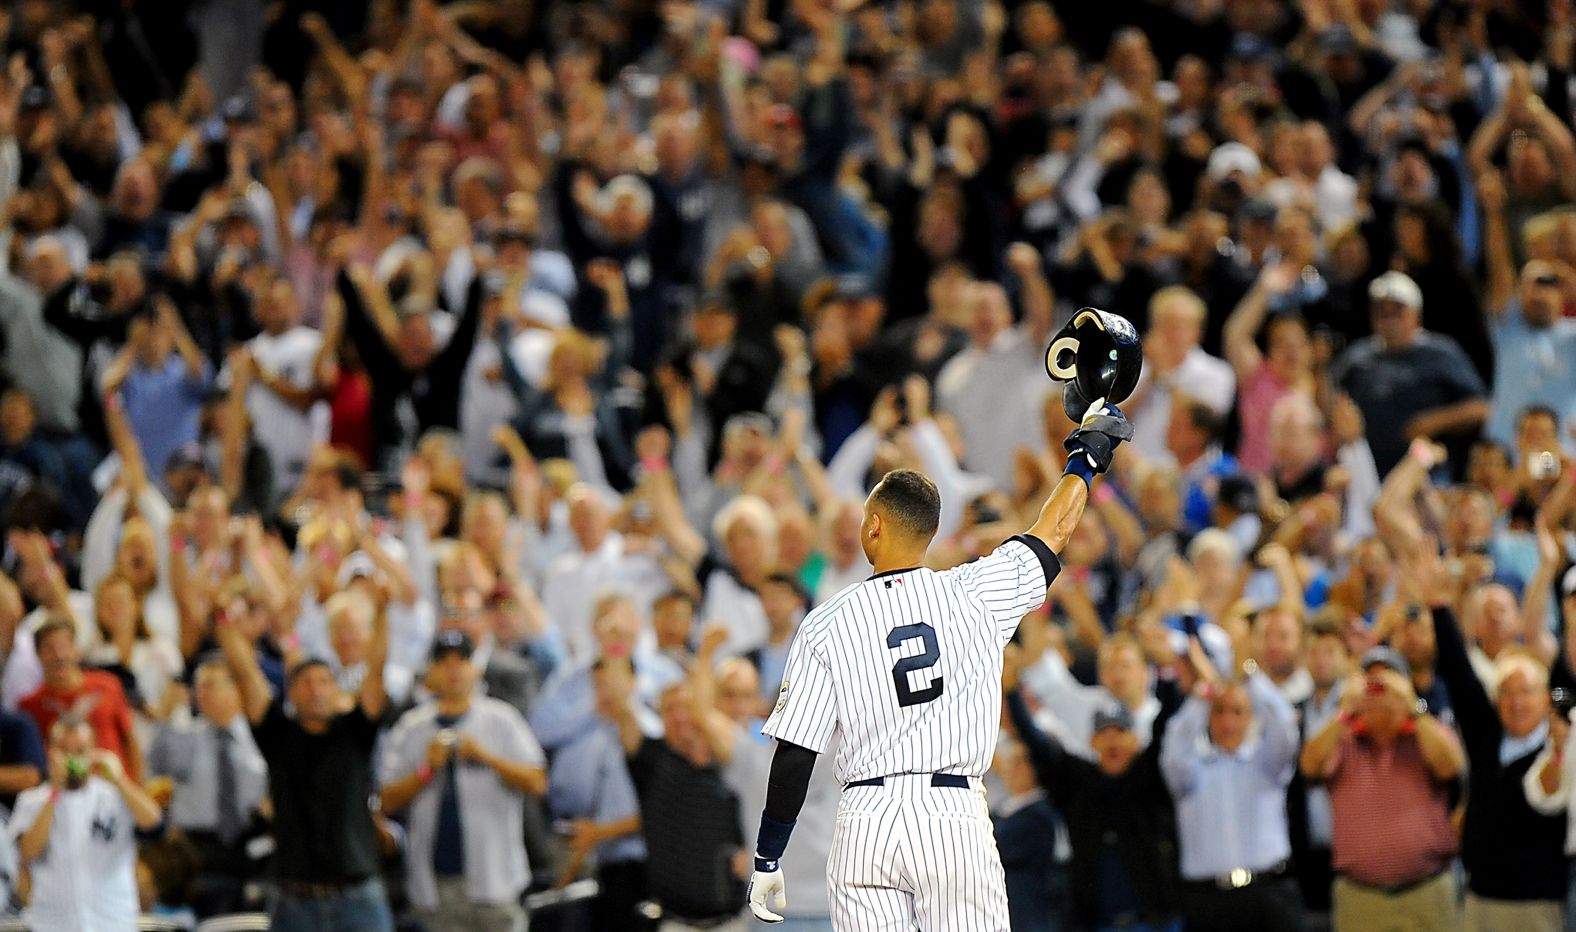 Jeter tips his helmet to an adoring crowd at the new Yankee Stadium after he tied the team record for career hits in September 2009. He would later go on to break that record, which had been held by Lou Gehrig.